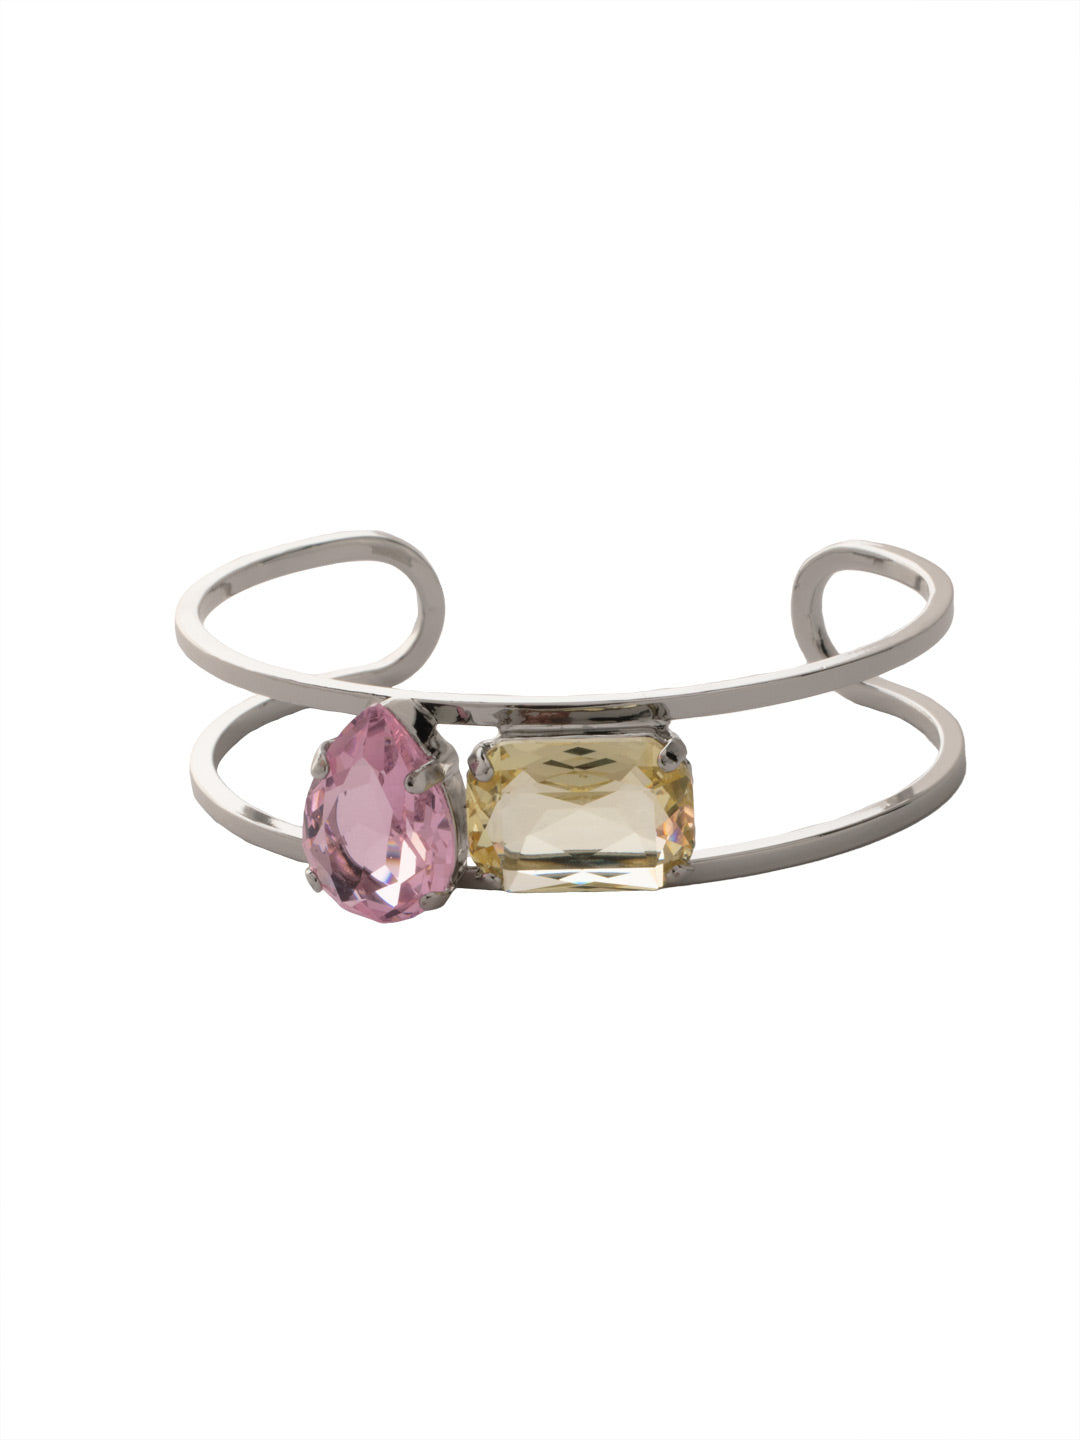 Andi Cuff Bracelet - BFF12PDPPN - <p>The Andi Cuff Bracelet features a pear cut and octagon cut crystal on an open, adjustable metal cuff band, creating a trendy candy gem statement. From Sorrelli's Pink Pineapple collection in our Palladium finish.</p>